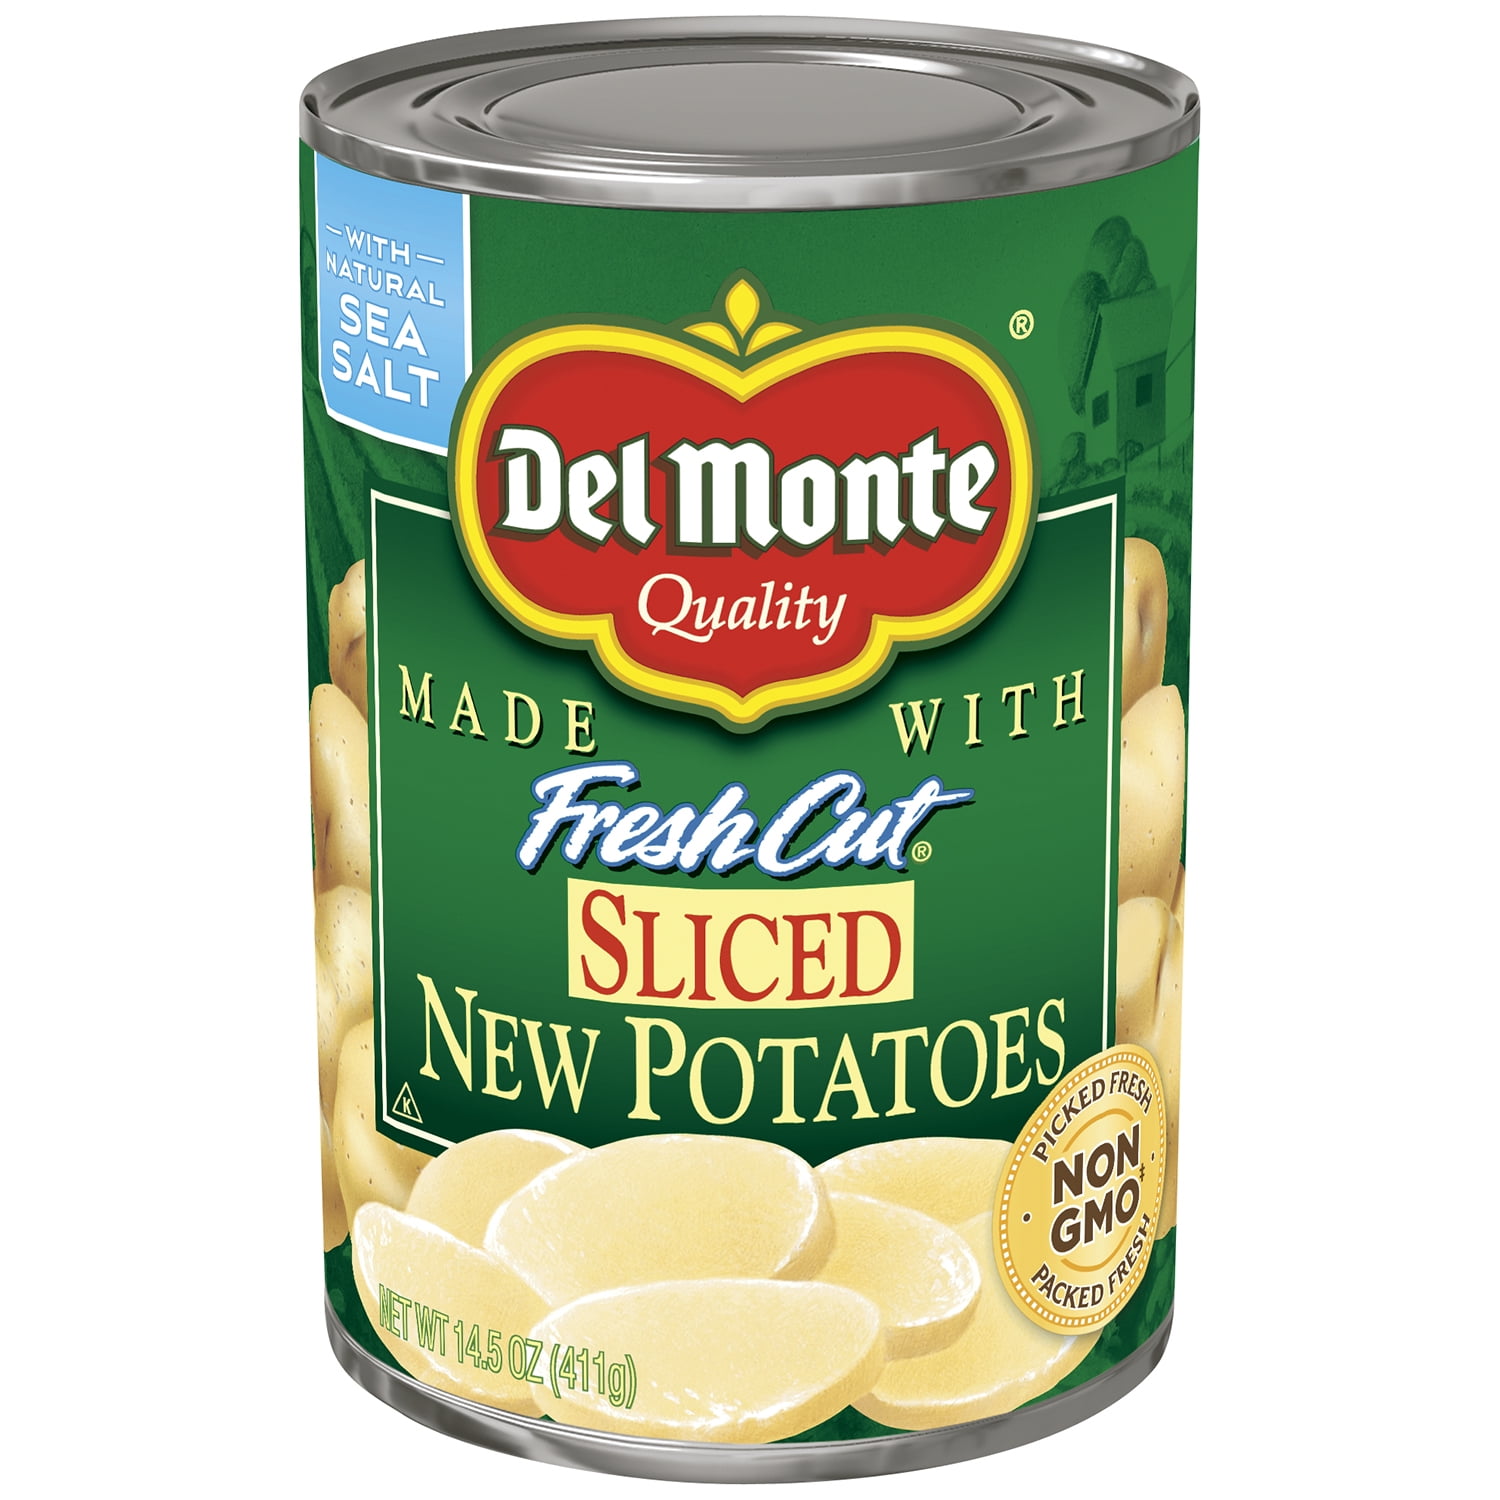 Del Monte New Potatoes, Sliced Canned Potatoes, 14.5 oz Can